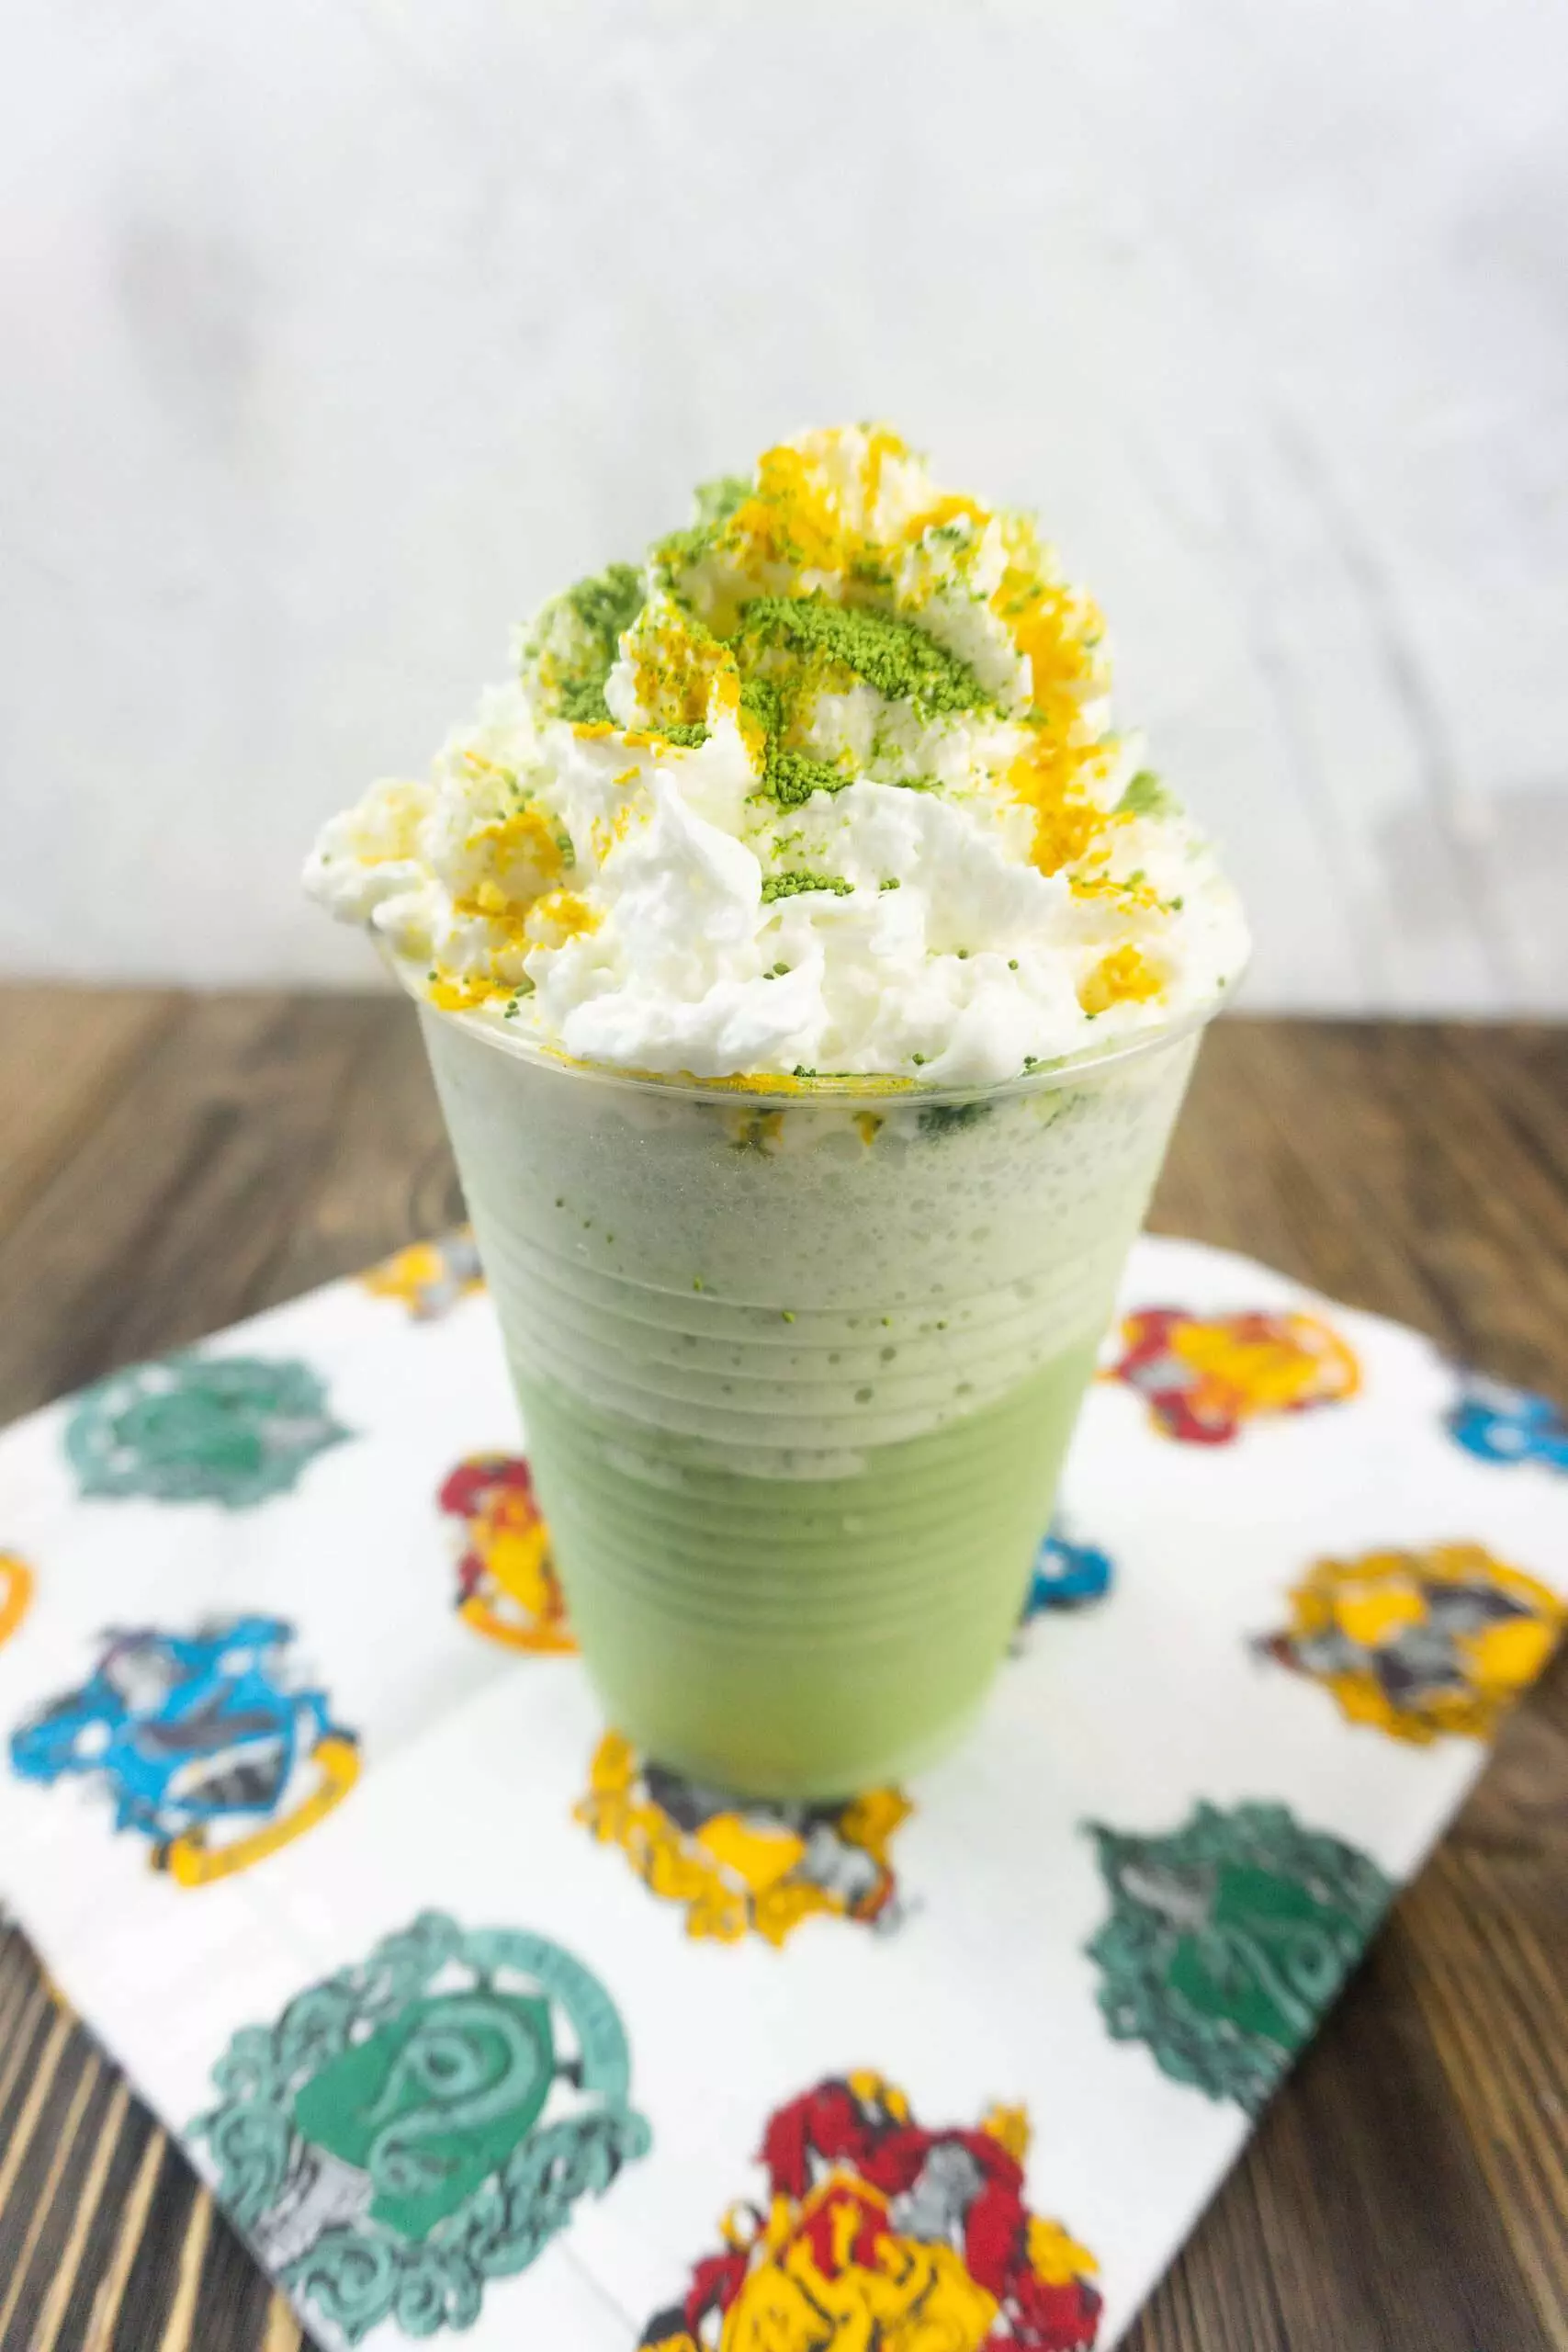 Harry Potter polyjuice potion frappuccino